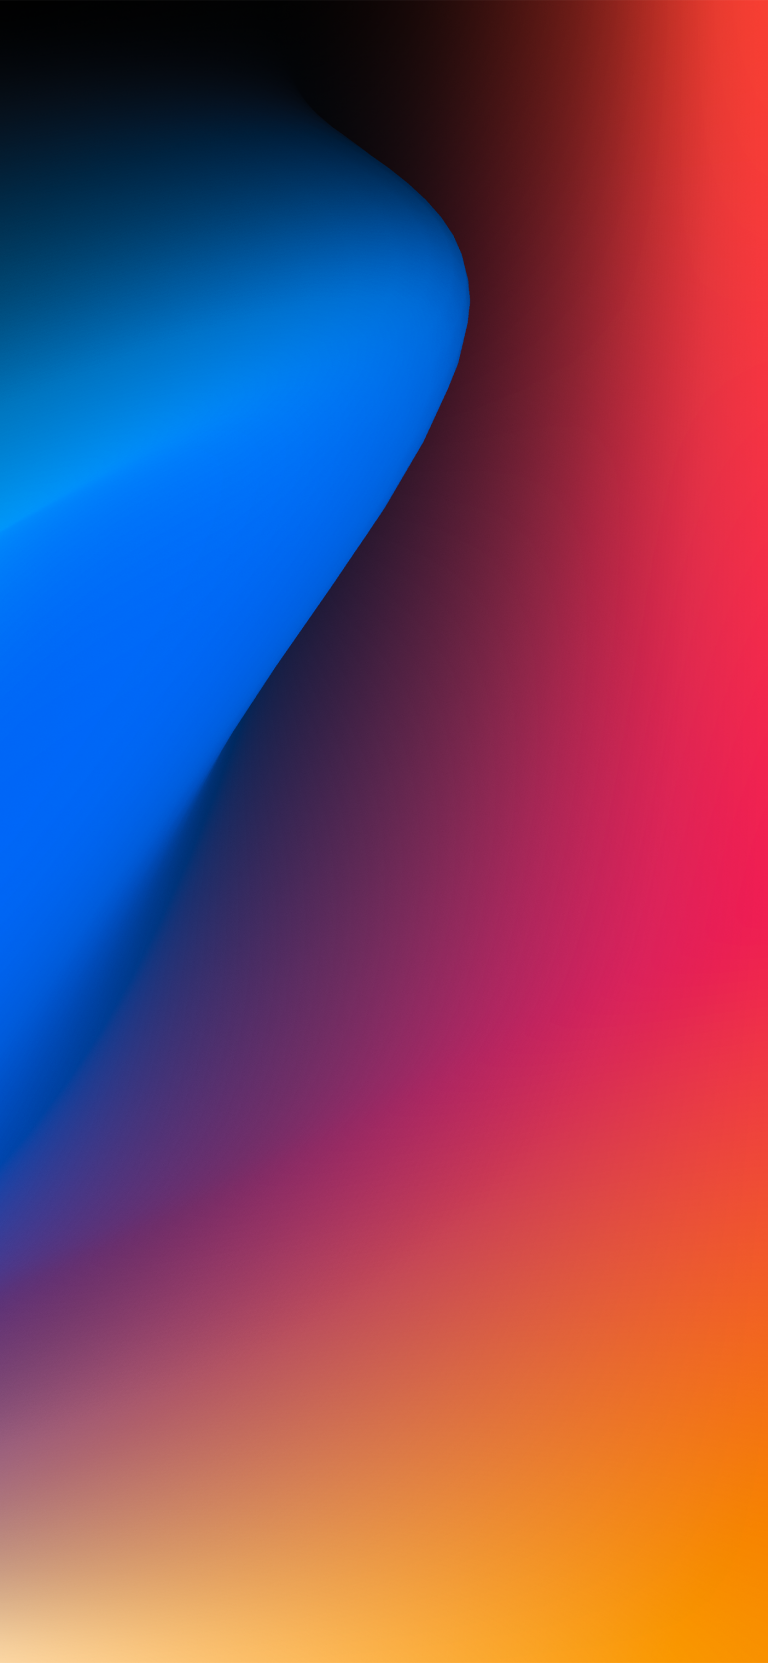 iOS 15 blue to red gradient swoosh by Hk3ToN | Zollotech